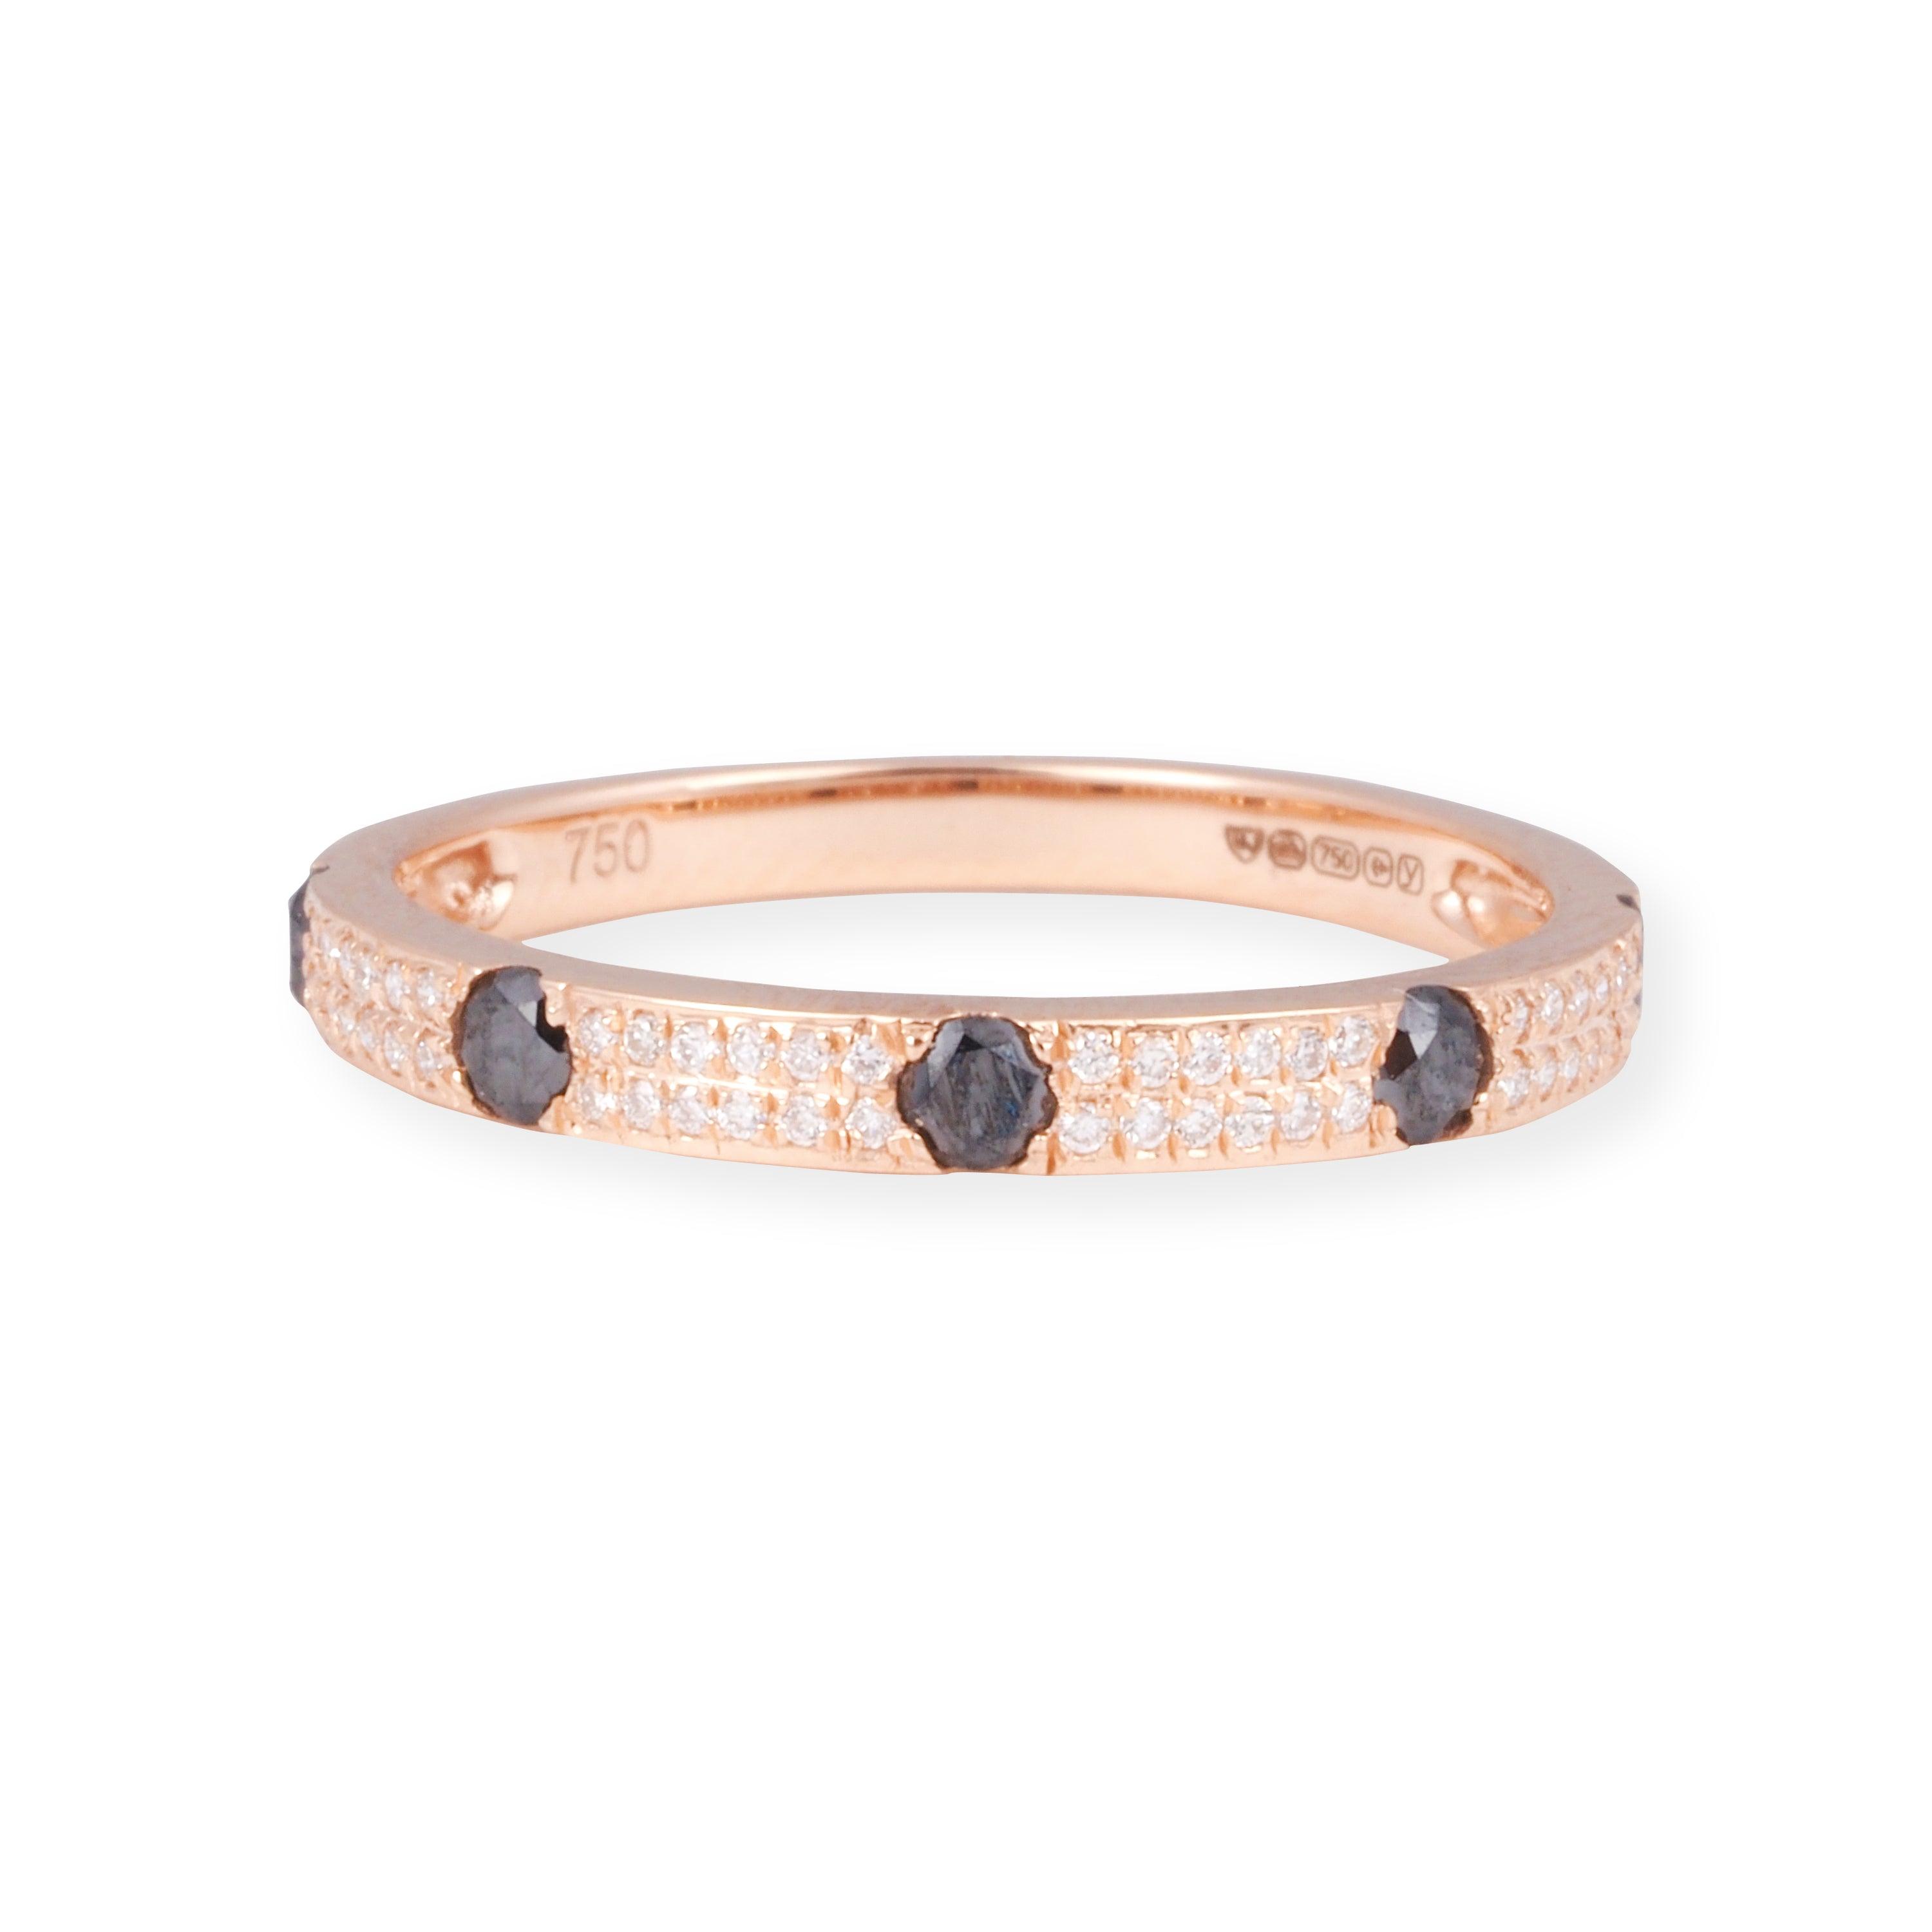 18ct Rose Gold White and Black Diamond Band Ring in Double-Row Pavé Setting LR-7035 - Minar Jewellers